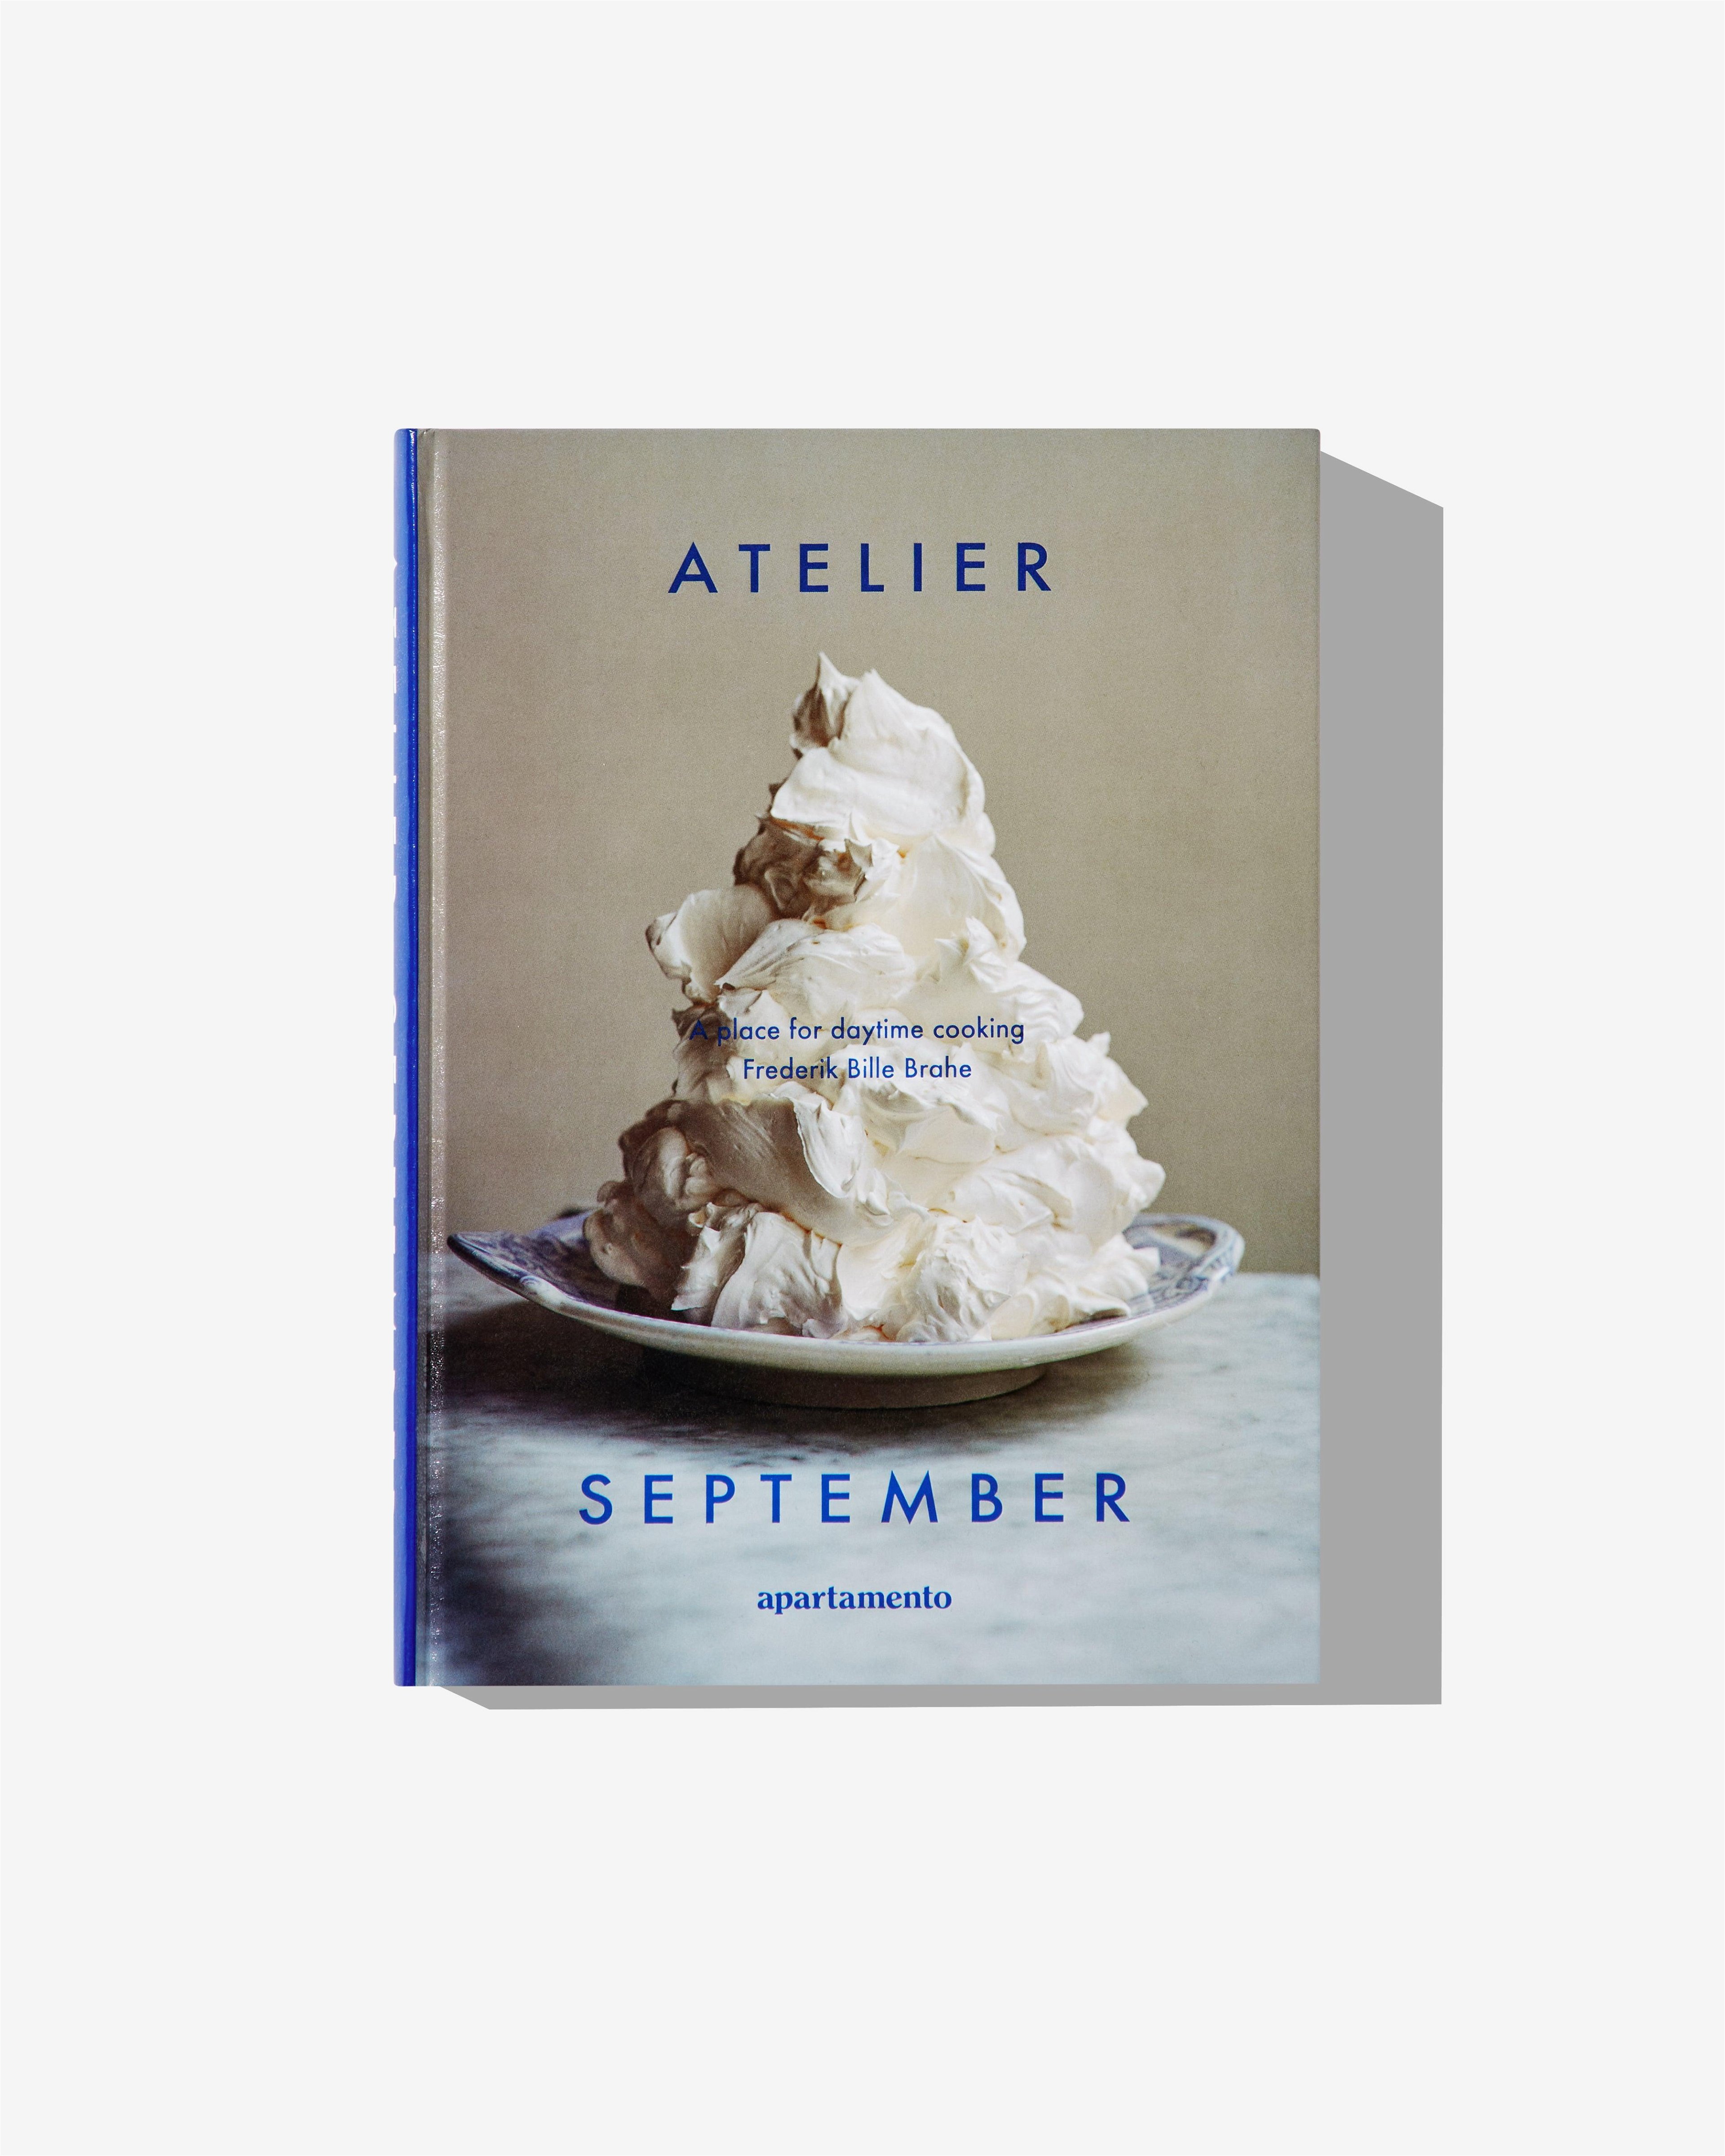 Apartamento - Atelier September: A Place For Daytime Cooking by APARTAMENTO